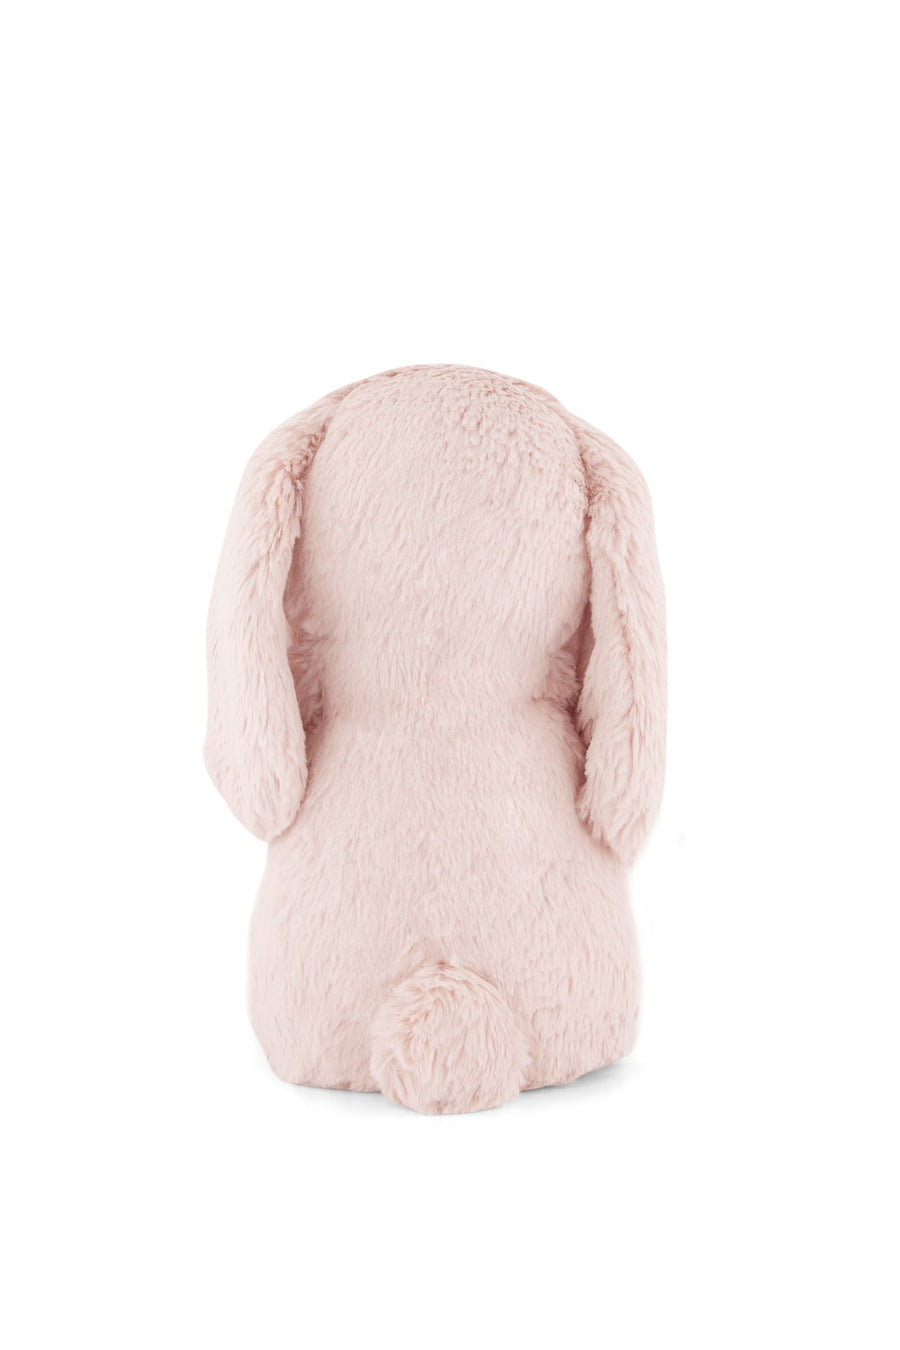 Snuggle Bunnies - Frankie the Hugging Bunny - Blush Childrens Toy from Jamie Kay USA